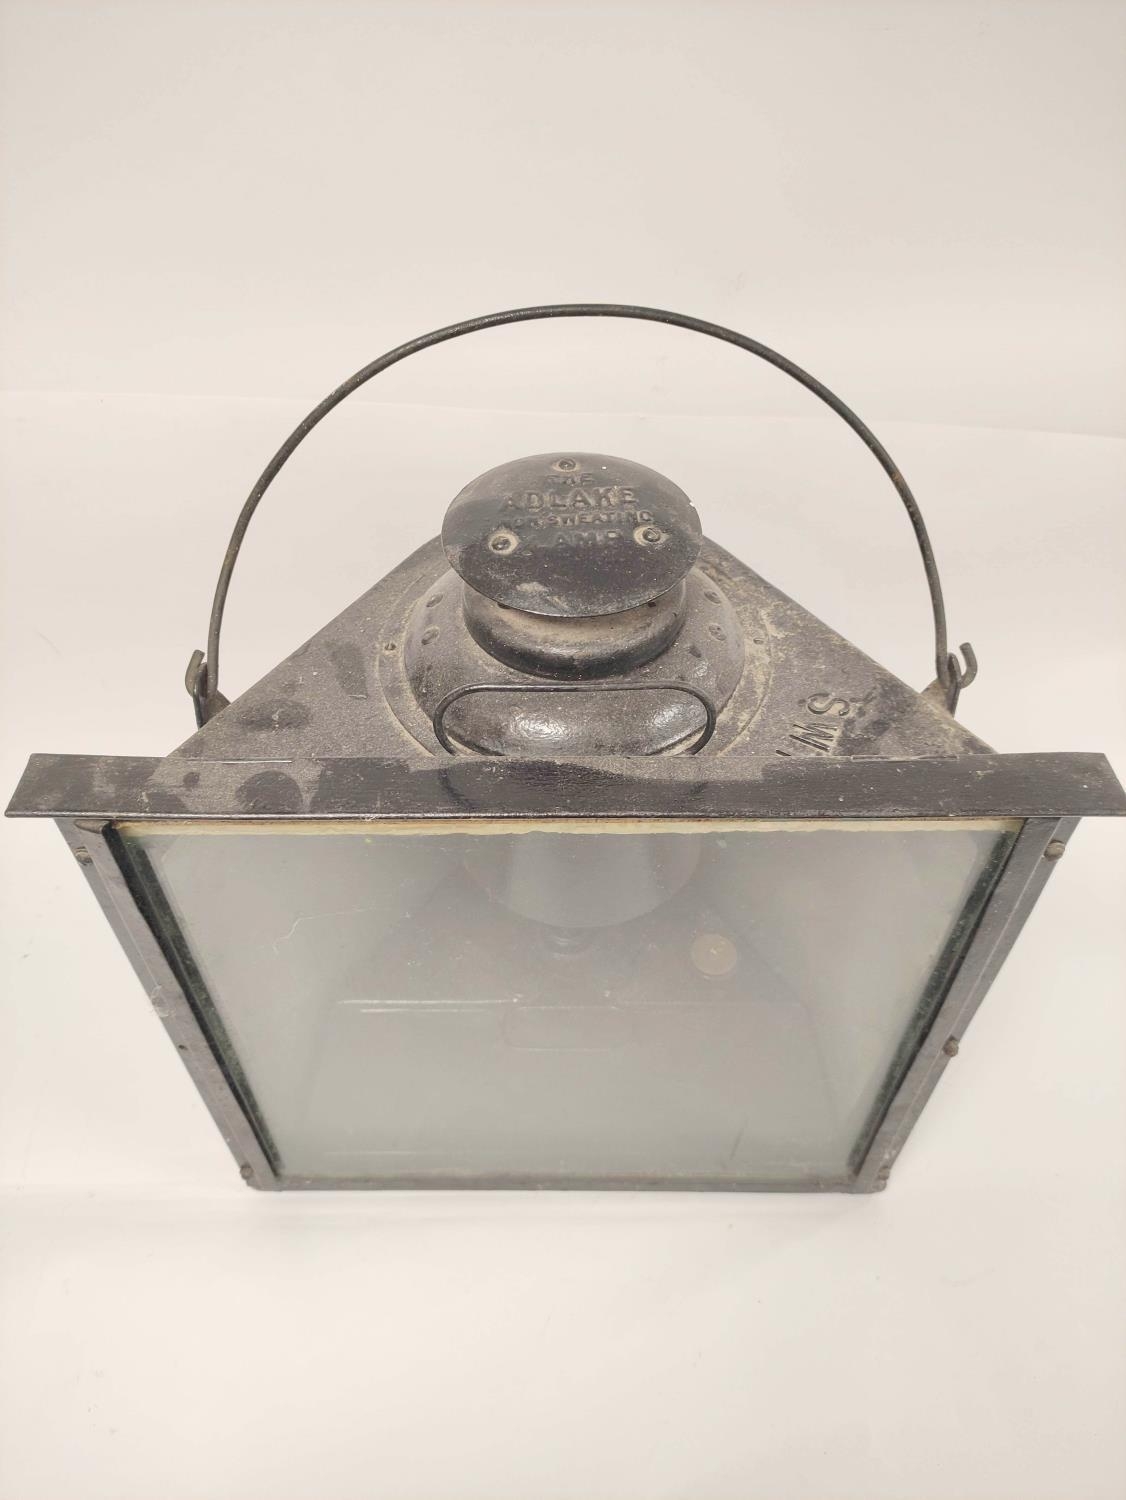 Railway lamp "The Adlake non sweating lamp" for LMS, contained in black painted carry case, - Image 2 of 4